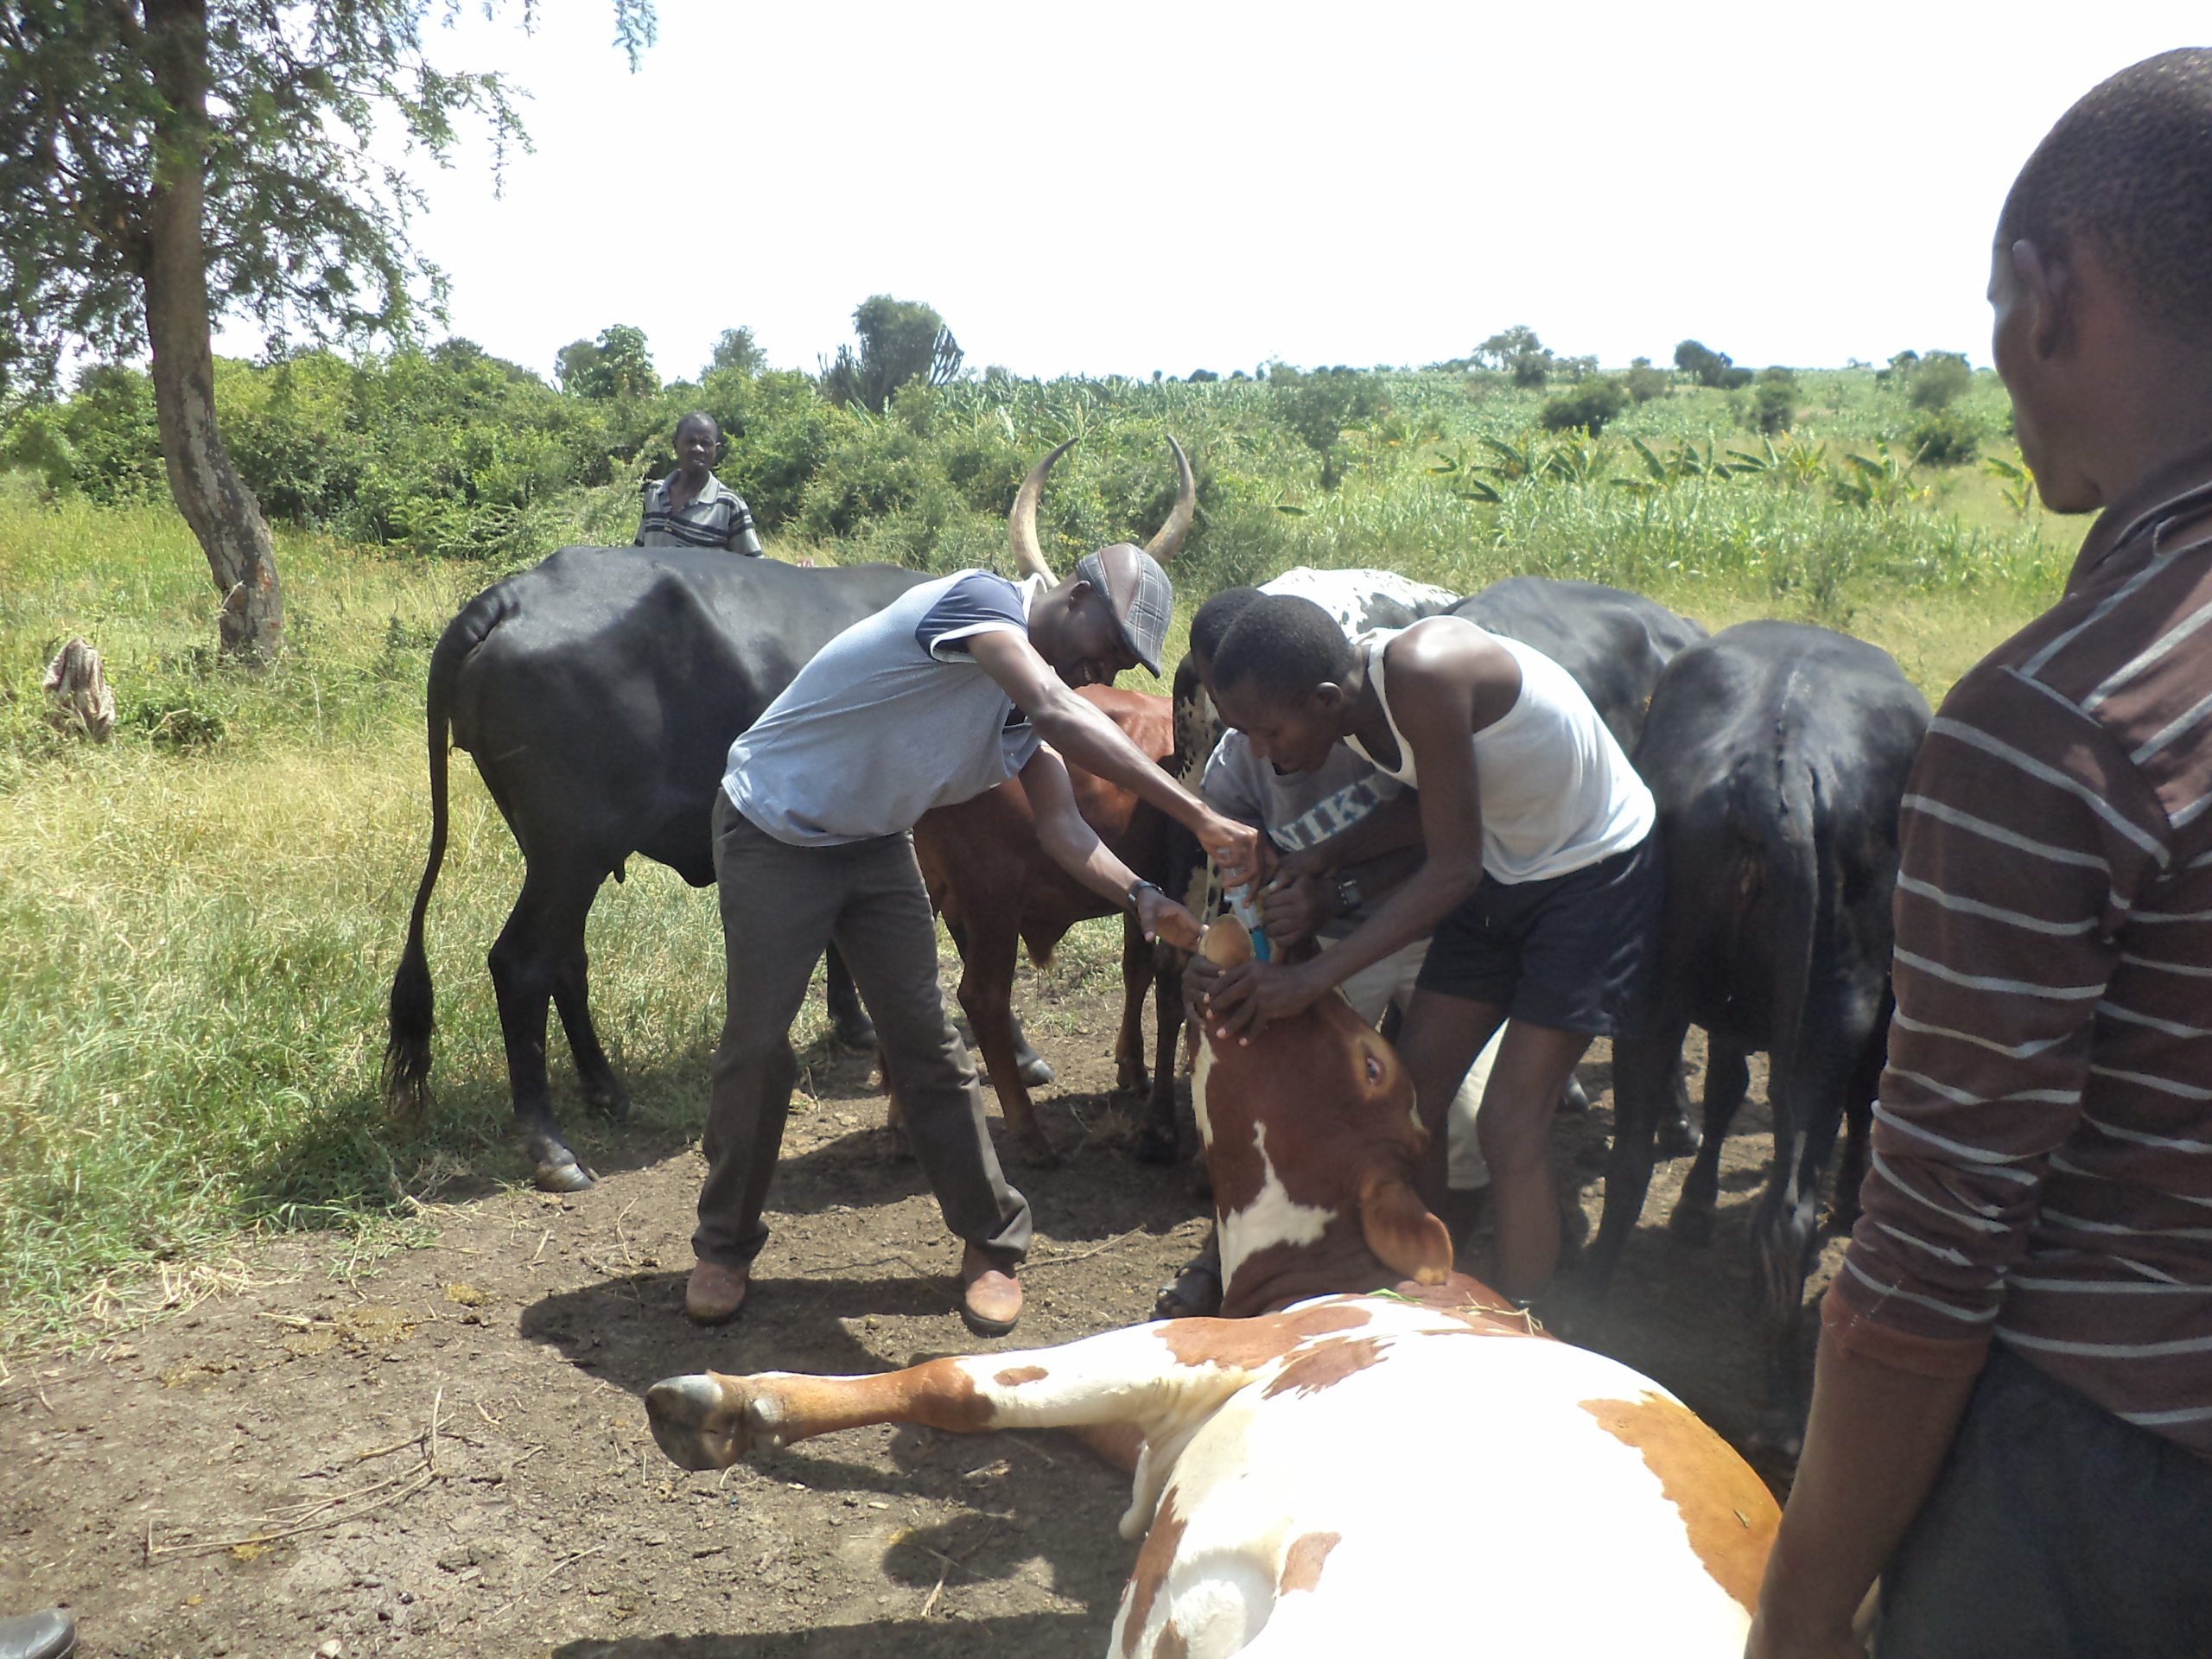 Deworming cattle in a field